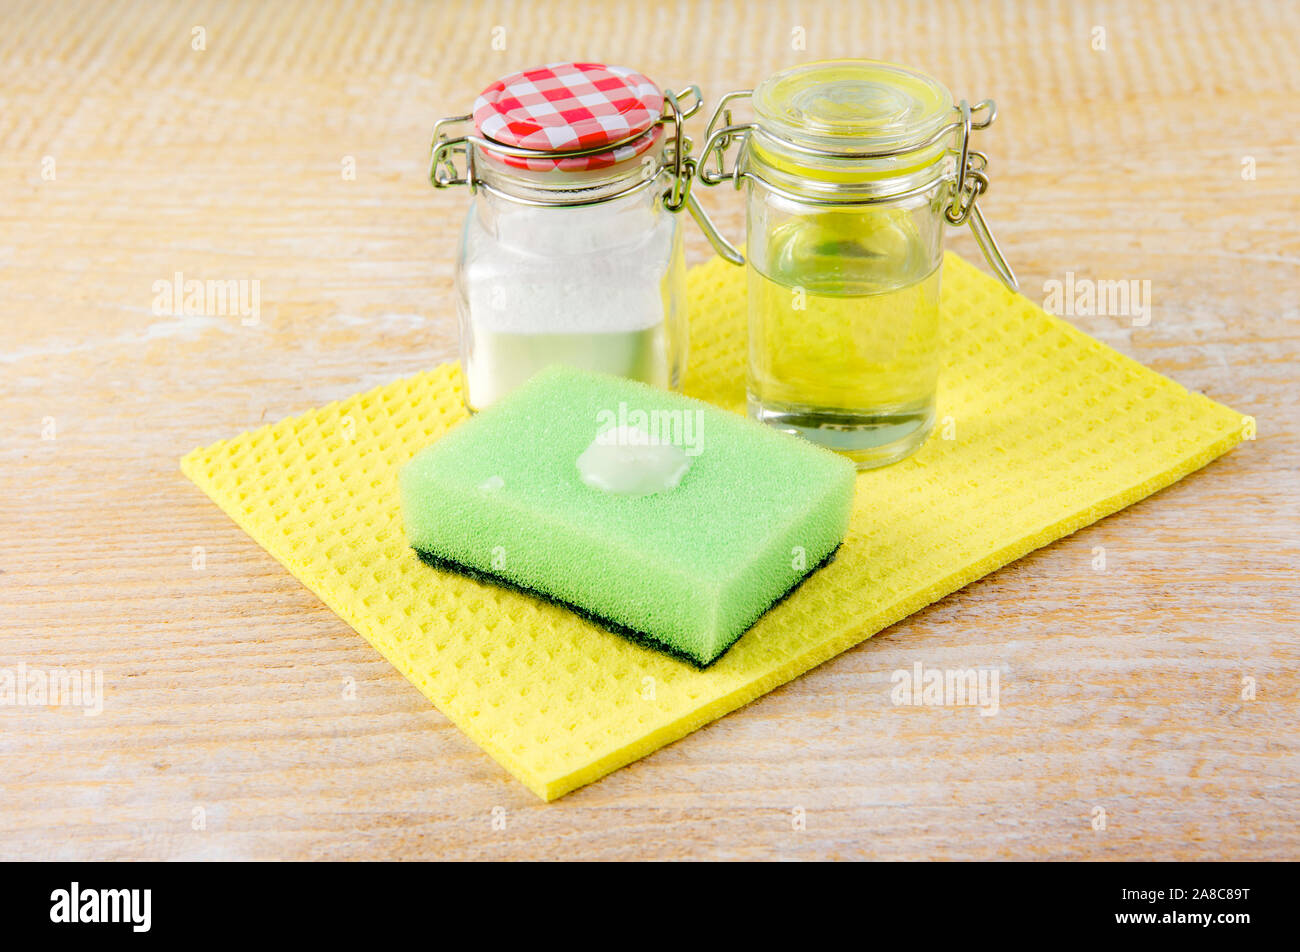 Side view of nature and eco friendly natural cleaner baking soda and olive oil paste on washing sponge for cleaning home, removing stains, non toxic c Stock Photo